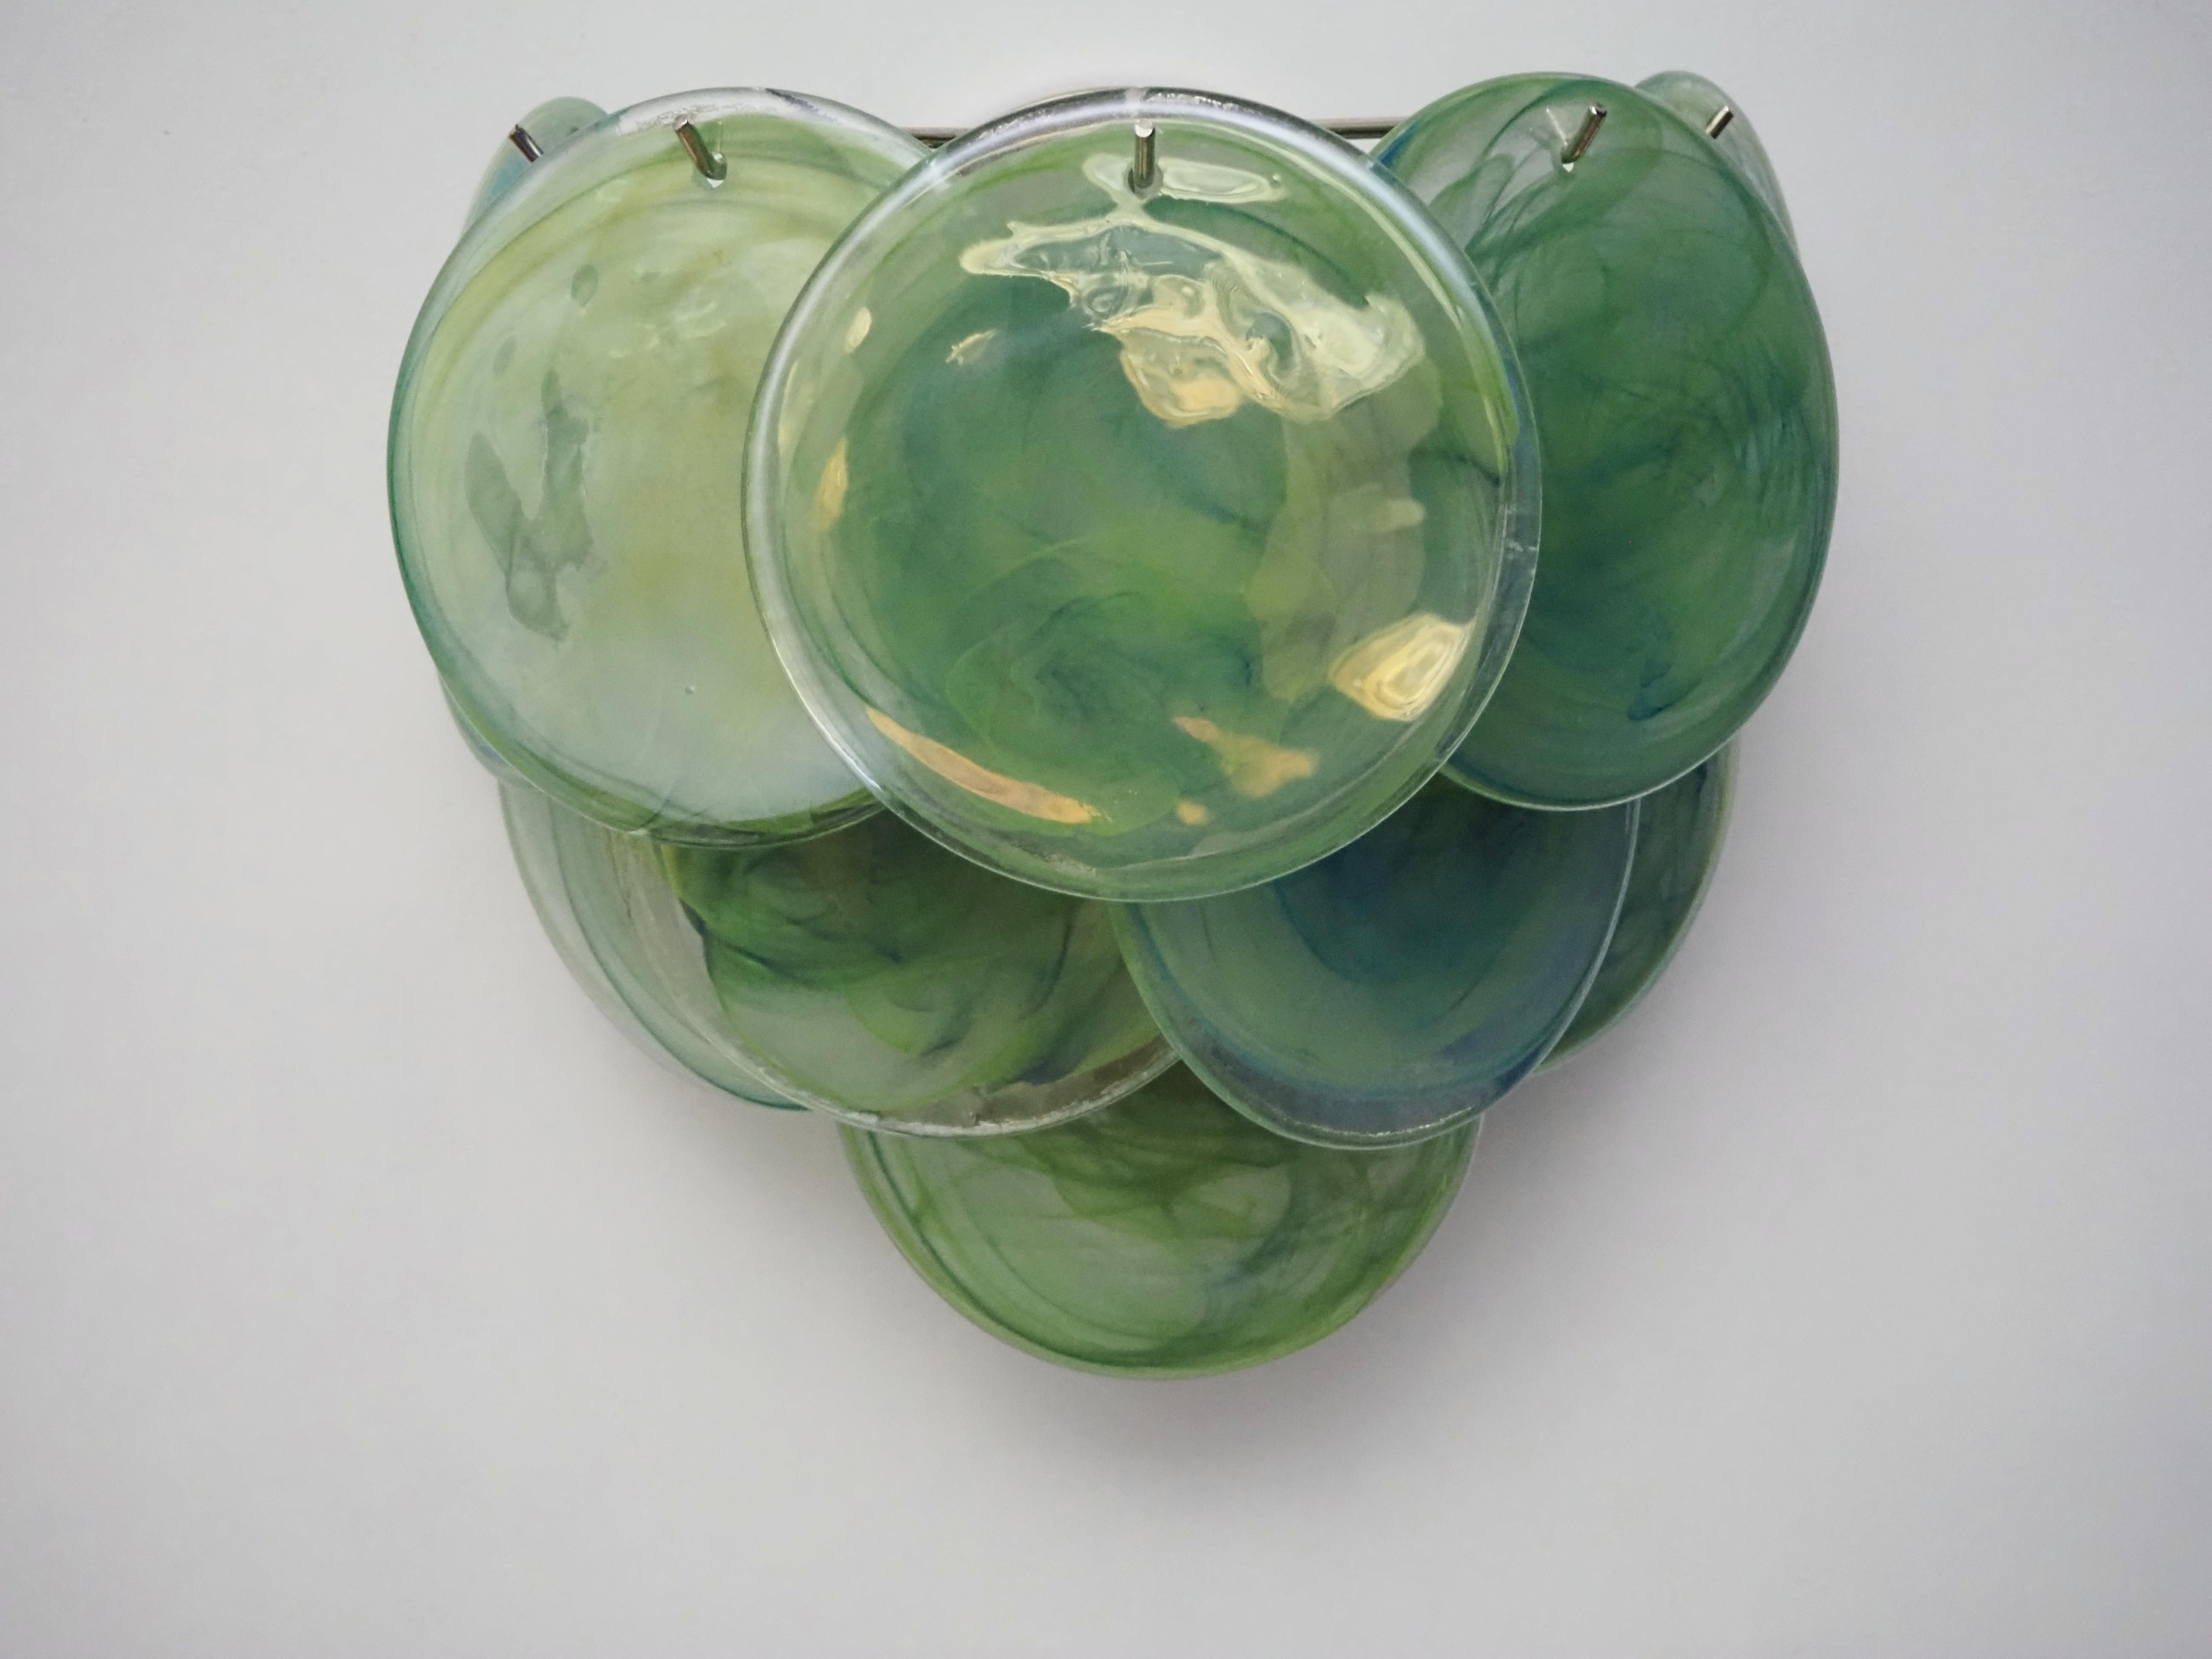 Galvanized Pair of Glass Wall Sconces - 10 Iridescent Alabaster Green Discs